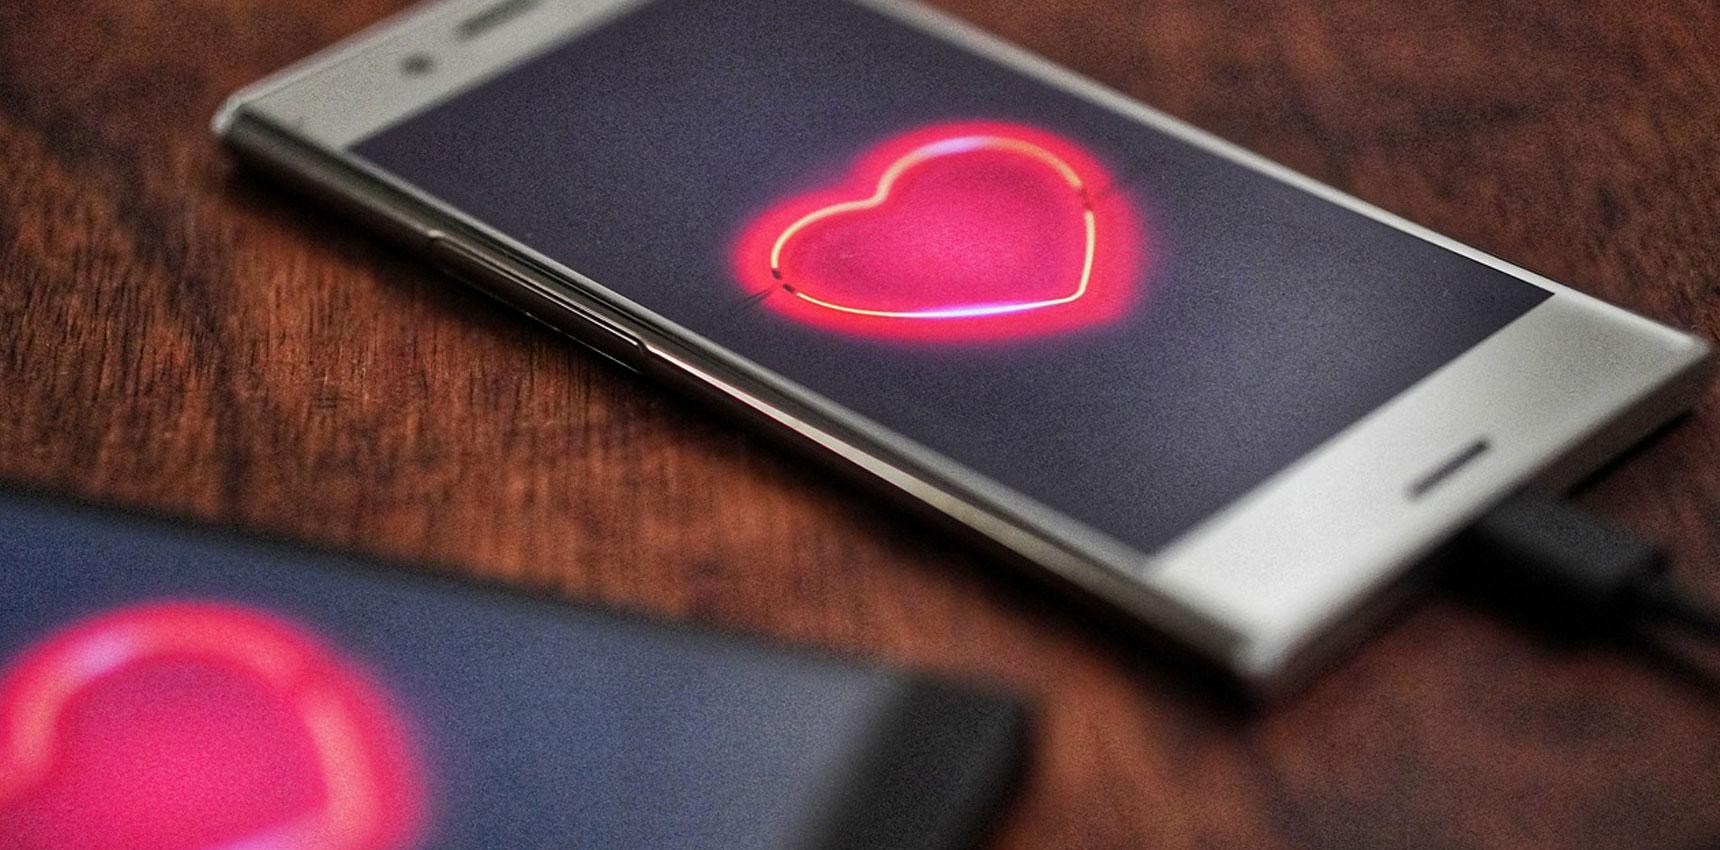 Mobile phone showing a heart icon